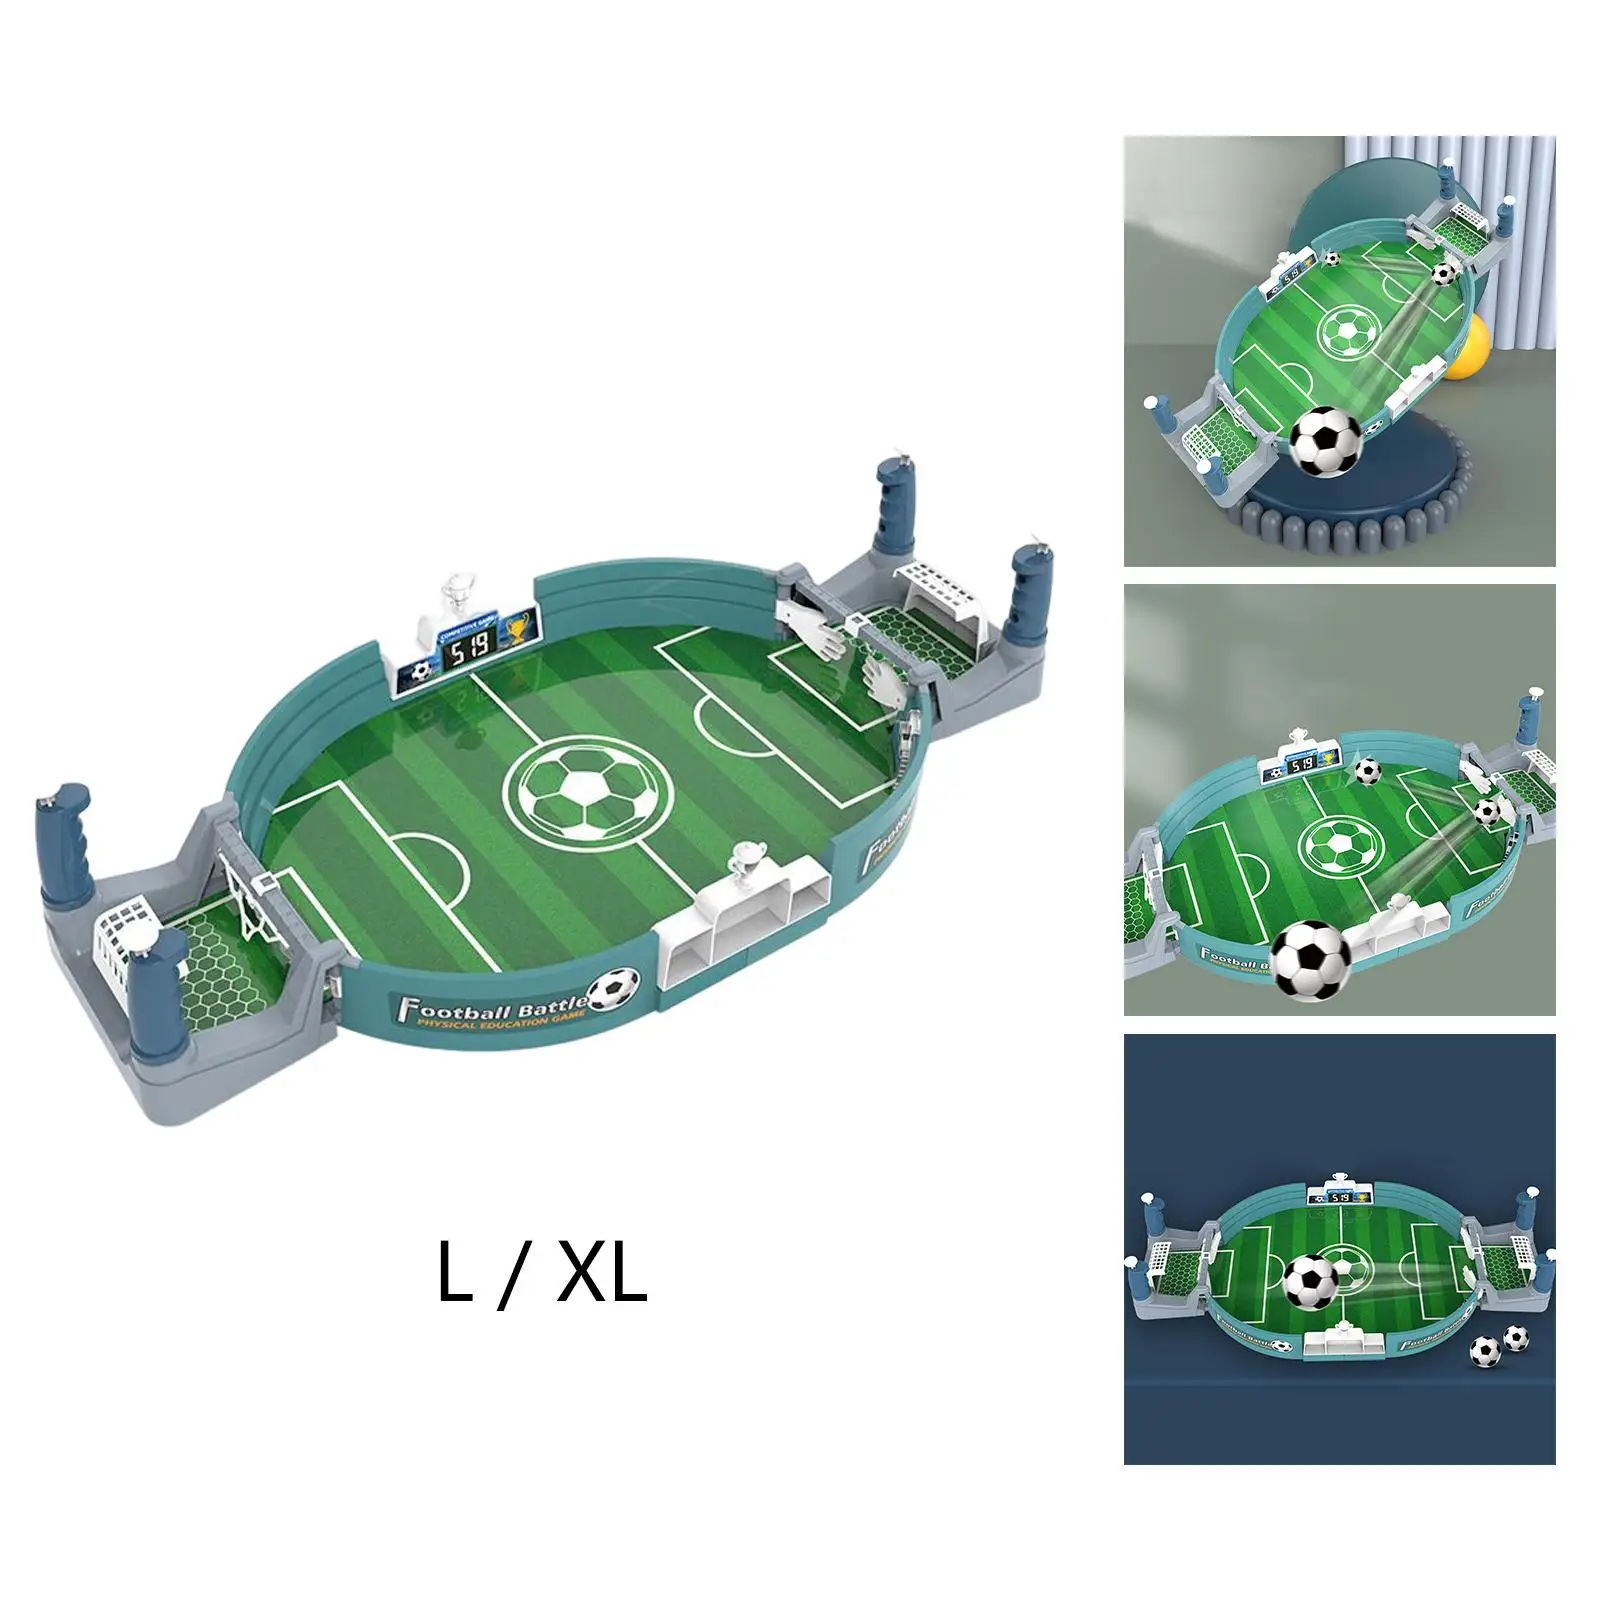 Desktop Football Board Games Kit Indoor Sport Toy Table Soccer Interactive for Girls Family Boys Adults